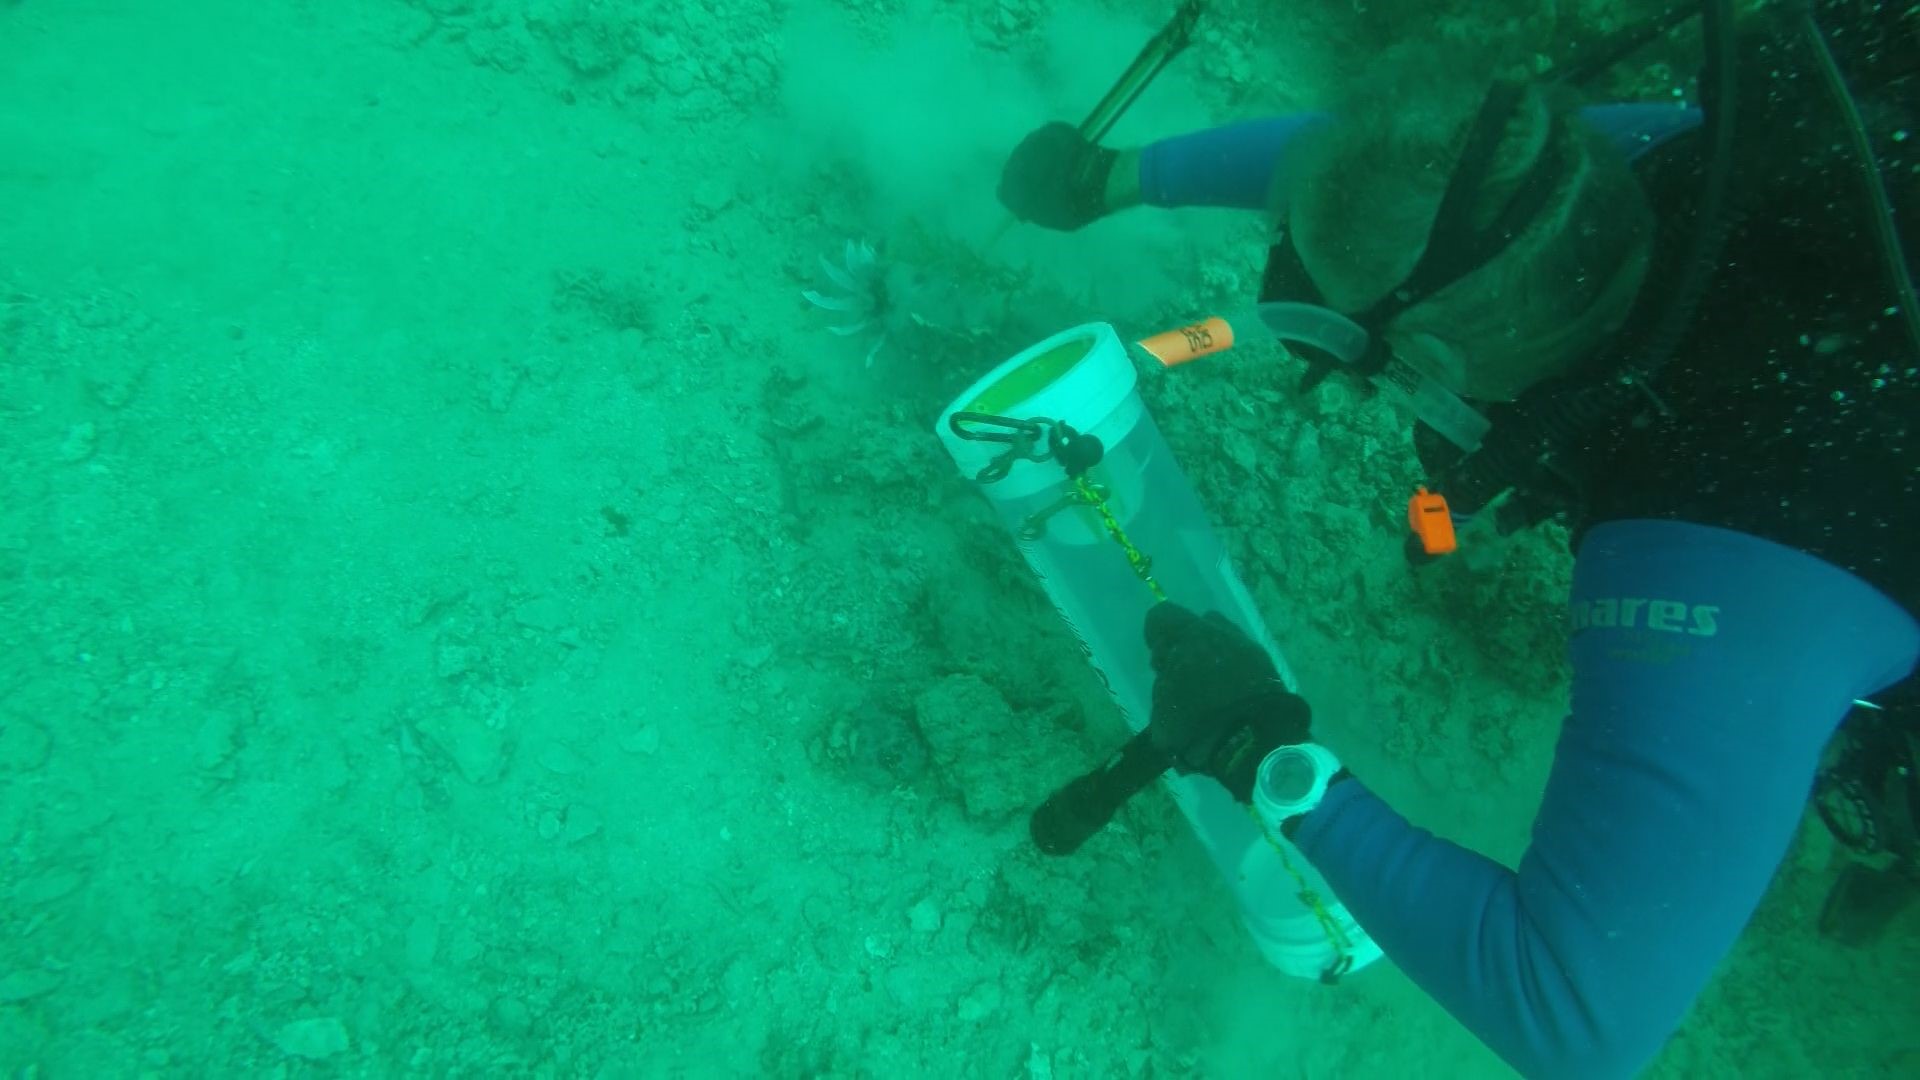 Tim Lehman is out looking for fish and lobster, but he takes down a device called a “Zookeeper.” It looks like diaper genie for lionfish. He spears them and stuffs them into the little prison. It also protects him from being stung by the fish’s 18 venomous spines.